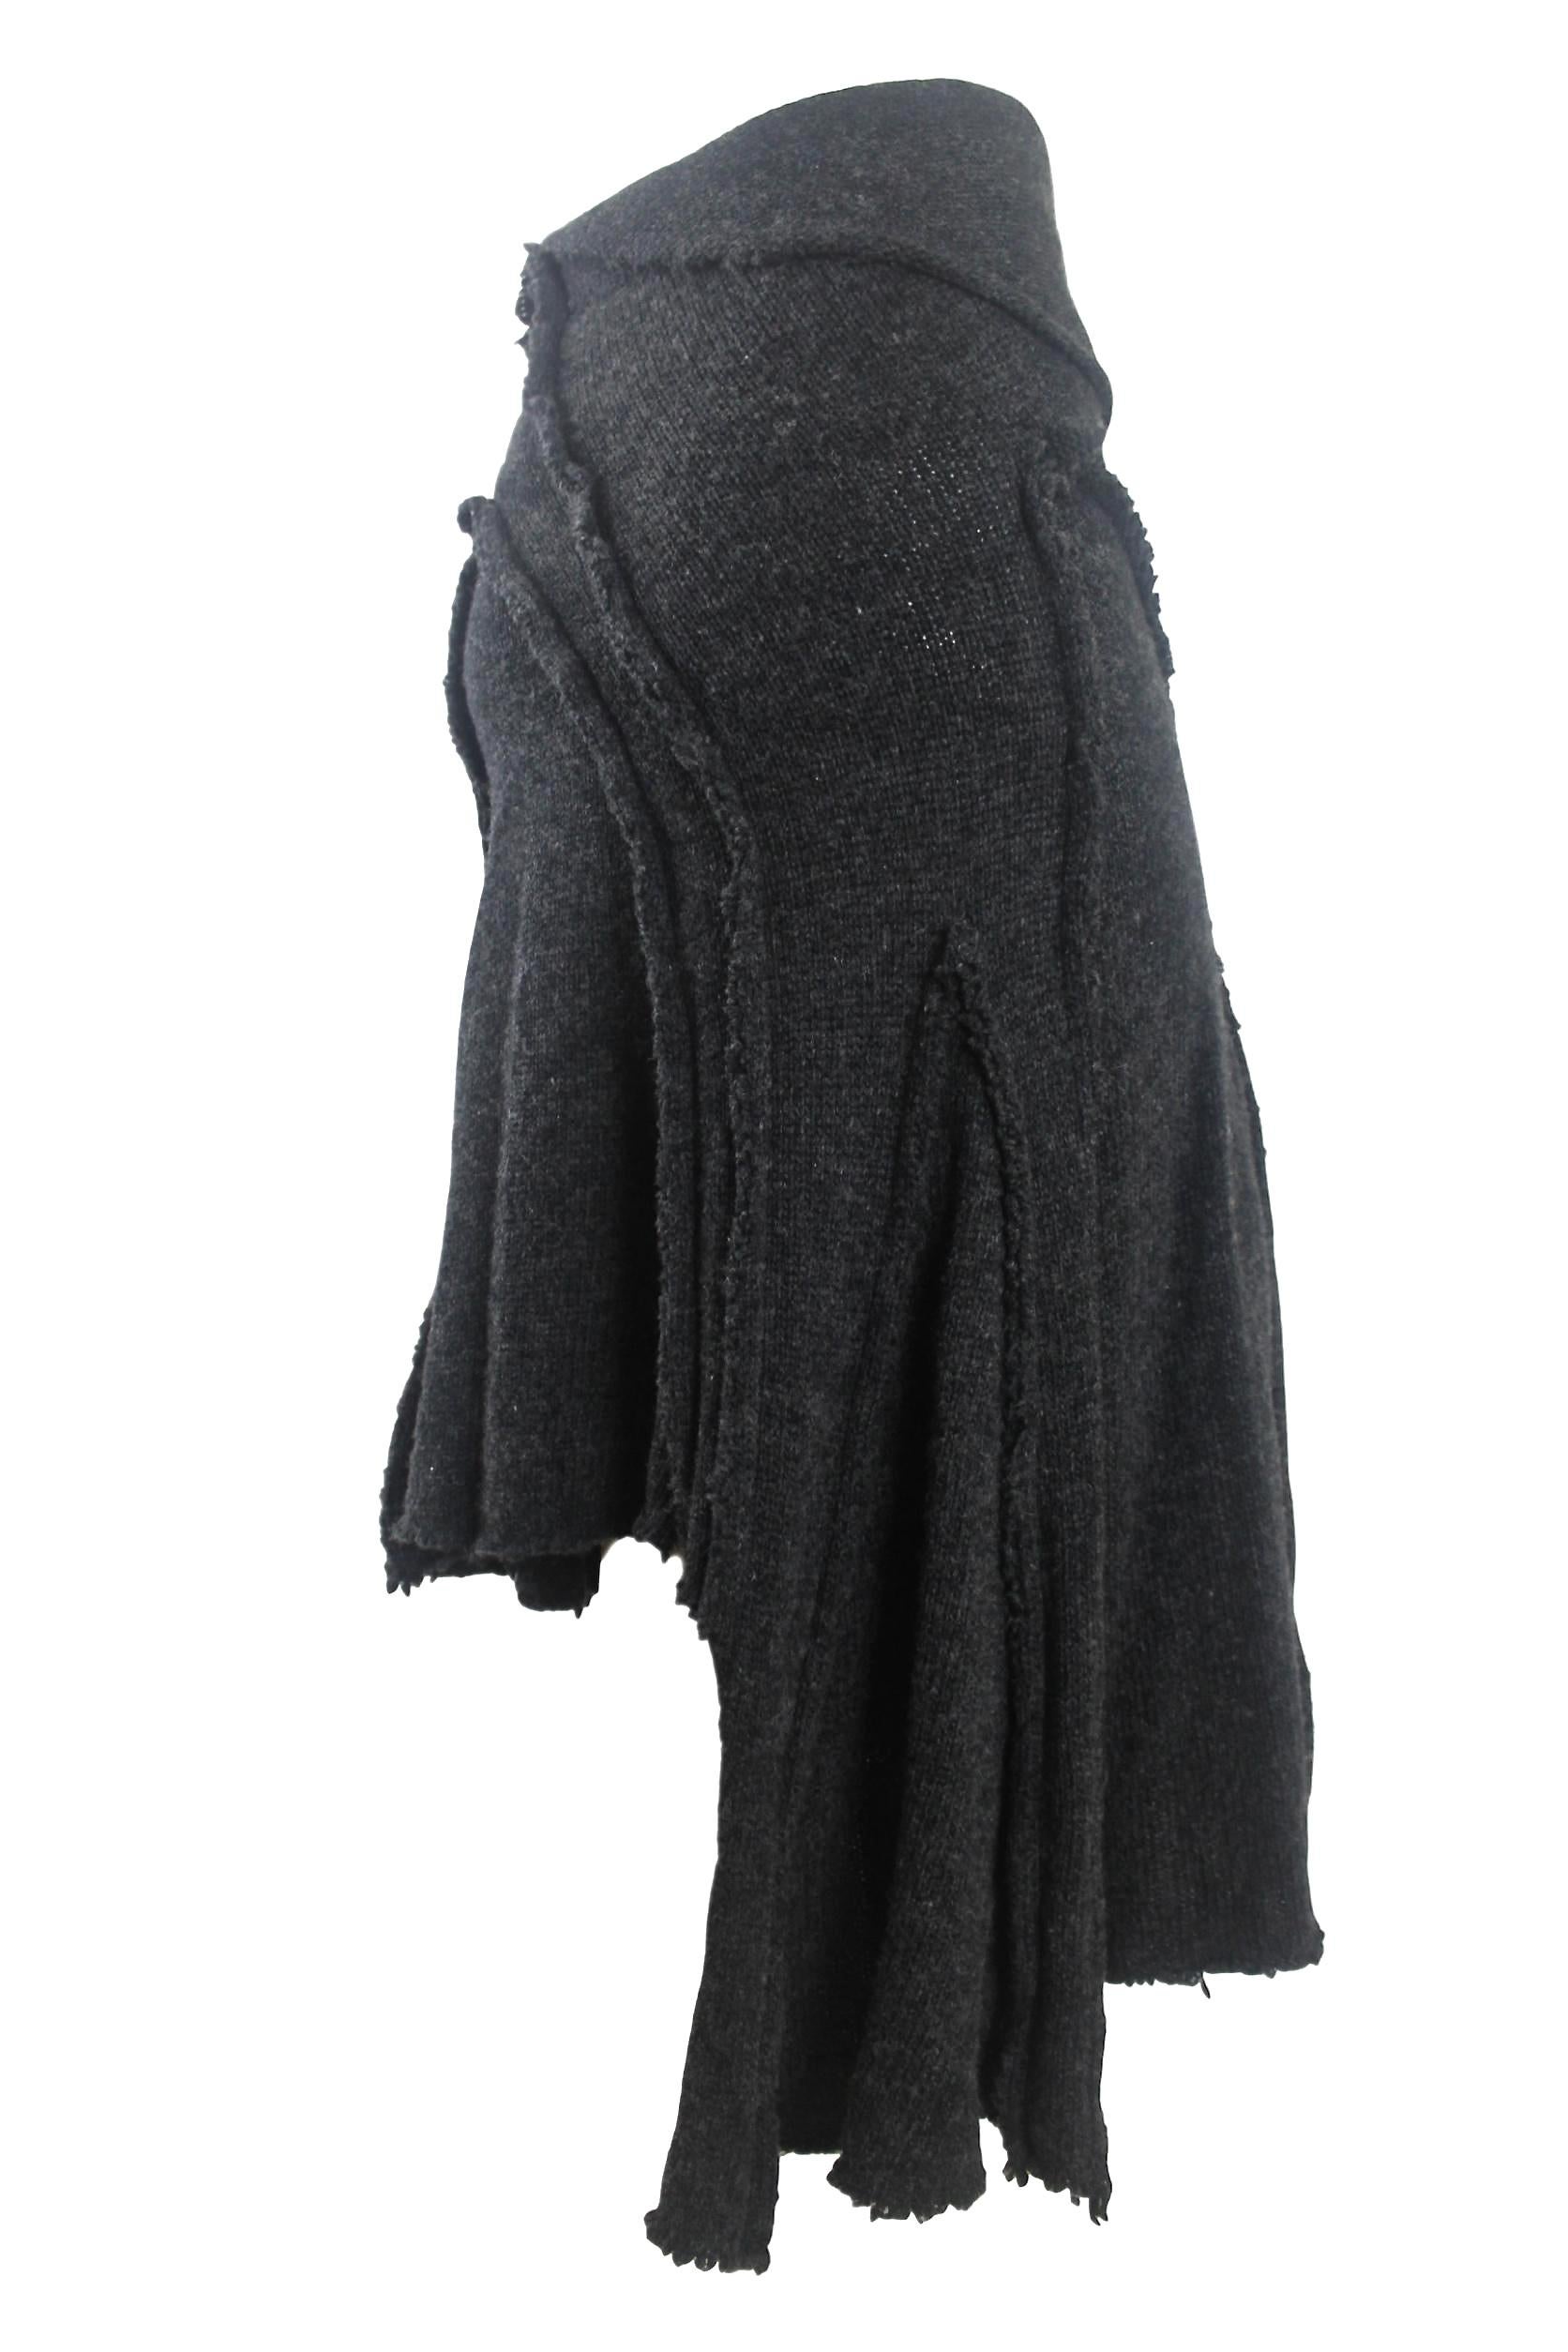 Come des Garcons 2002 Collection Wool Knit Skirt For Sale 1